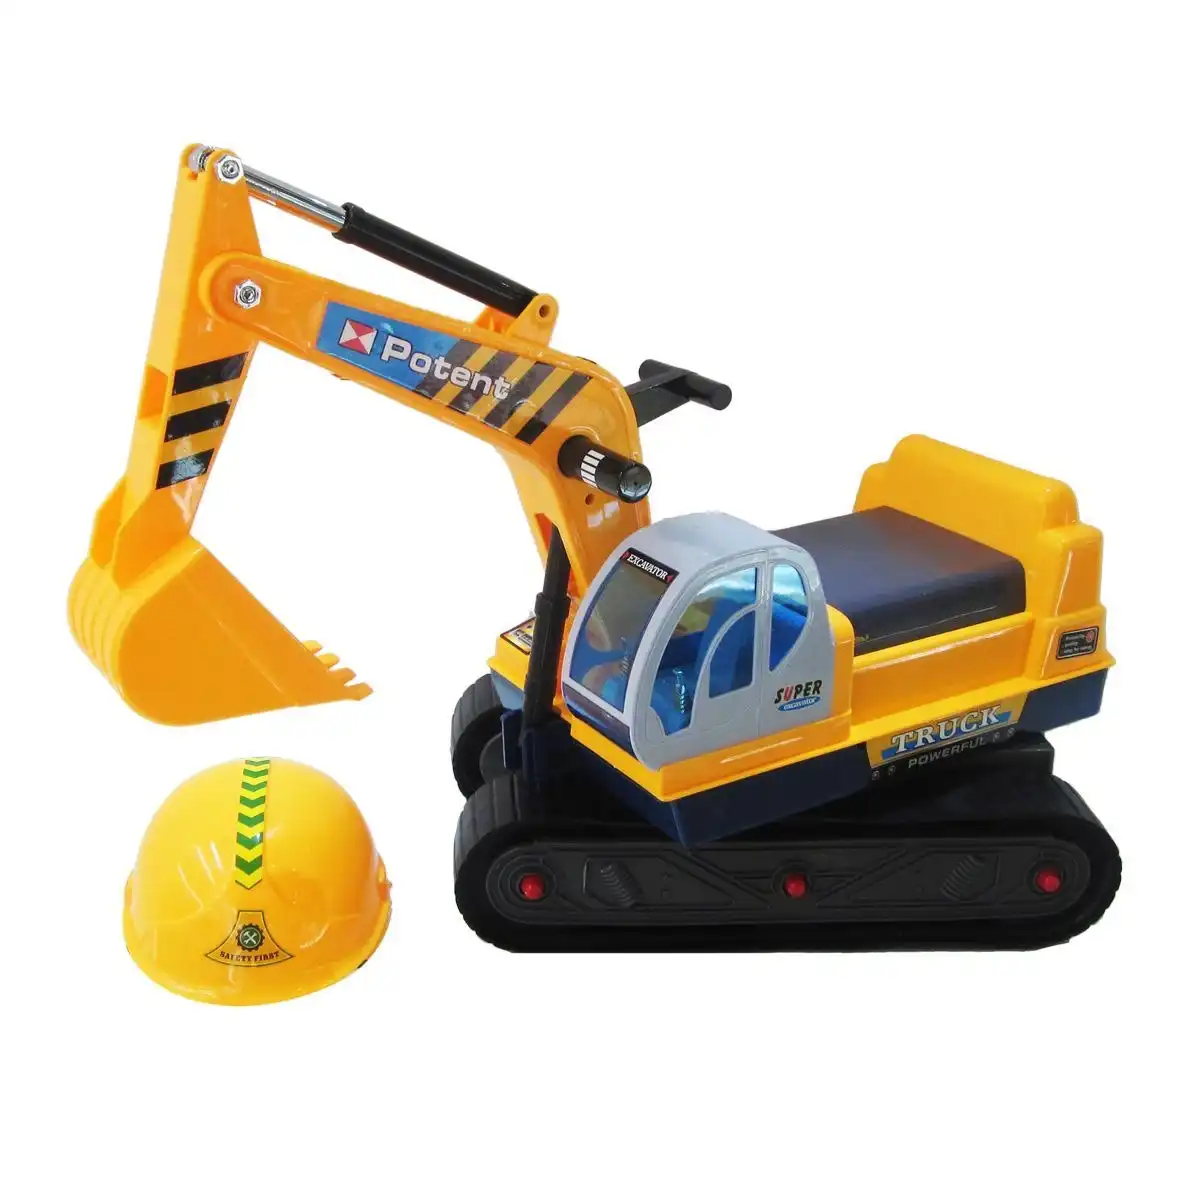 Ausway Toy Ride On Excavator Digger Pretend Play Construction Truck